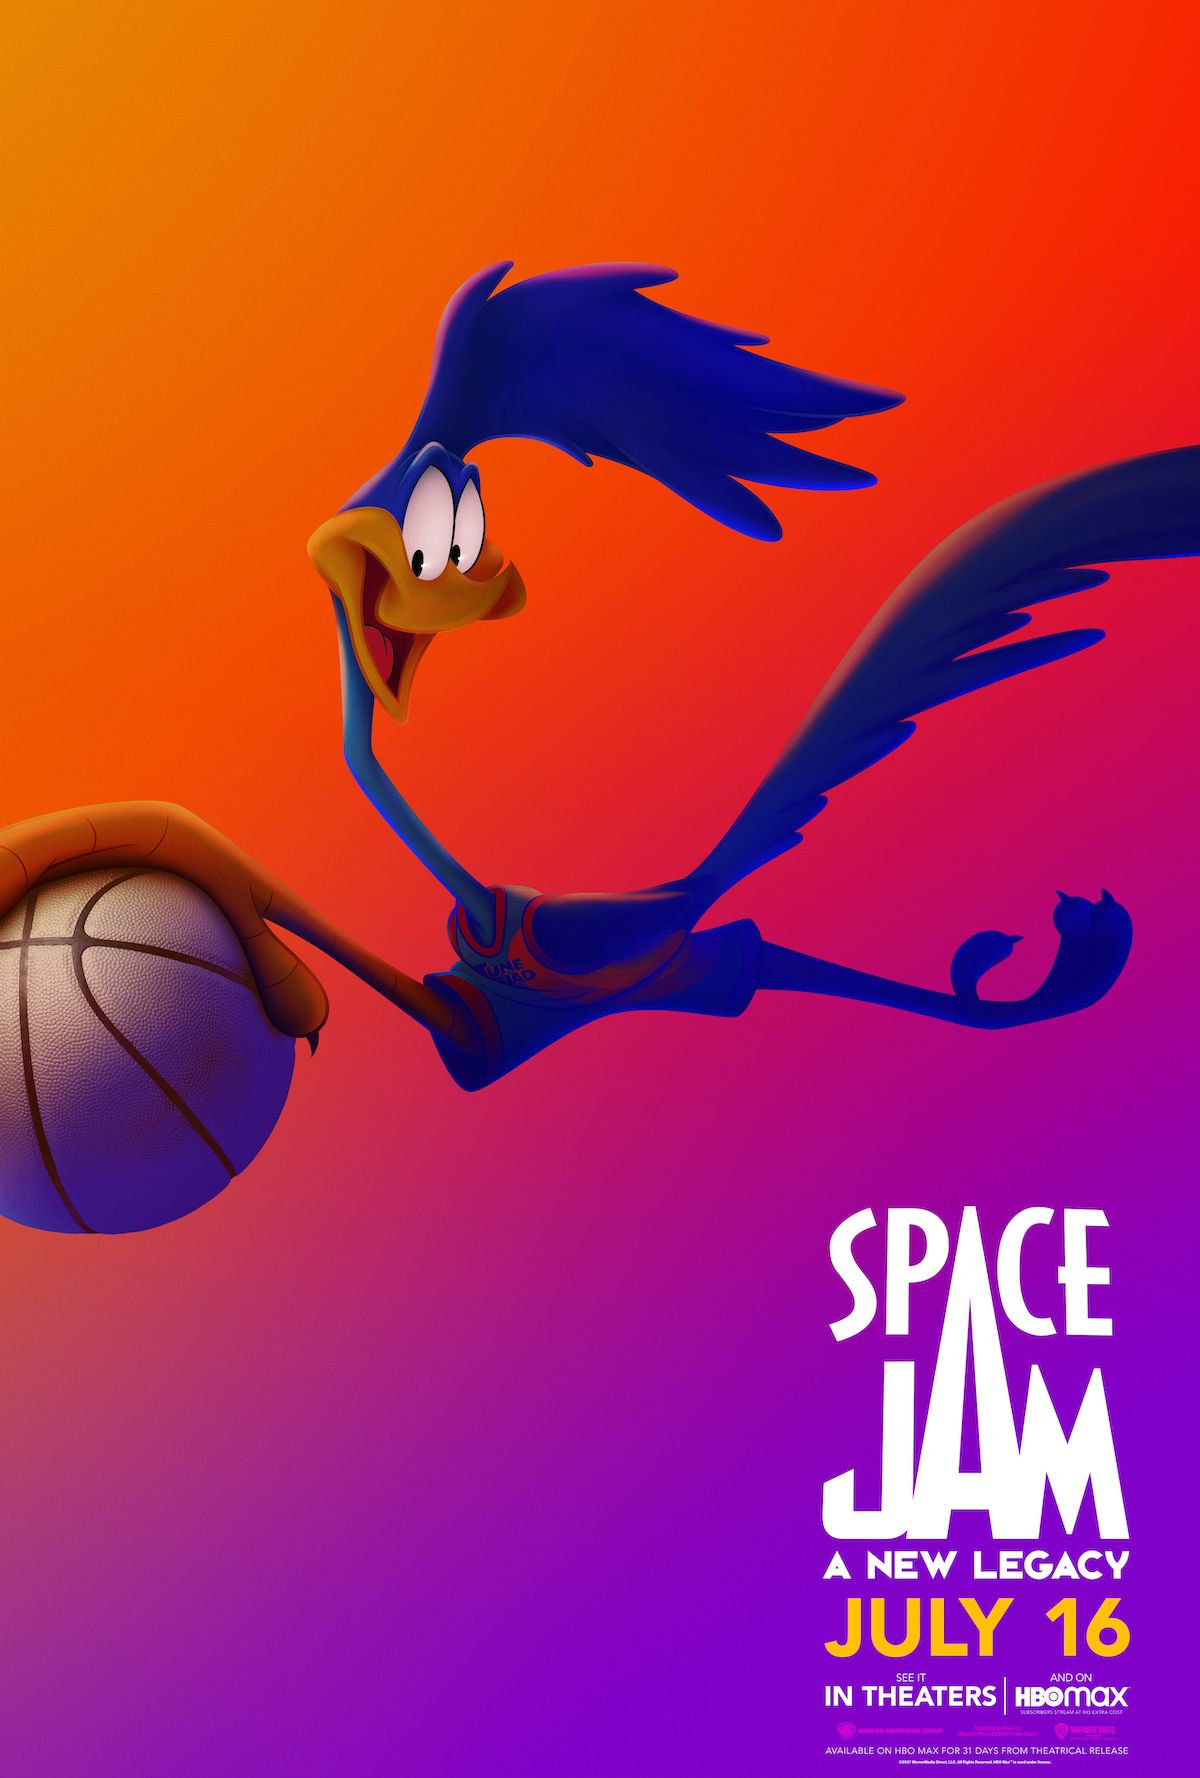 Roadrunner Space Jam 2: A New Legacy character poster